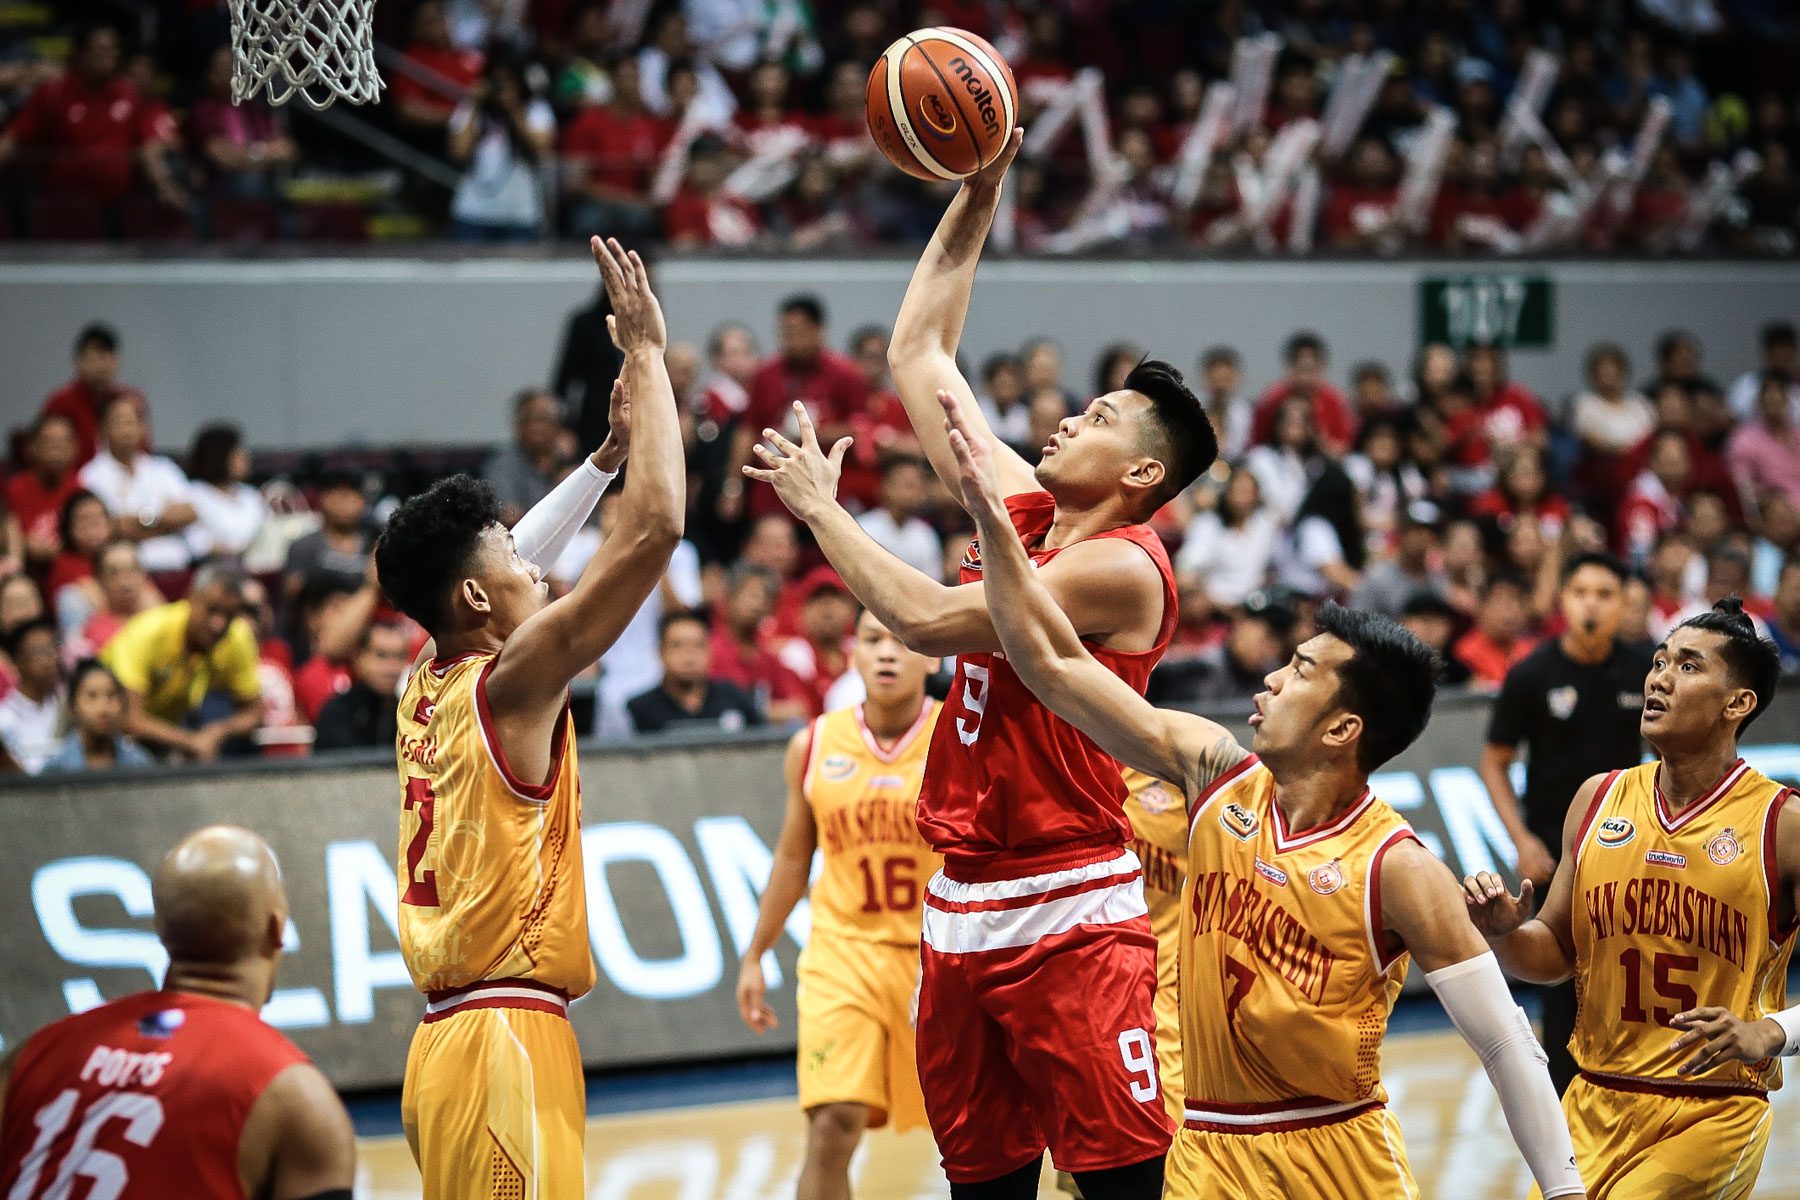 Stags thrash Blazers by 30 points, Red Lions cruise to 5th straight win